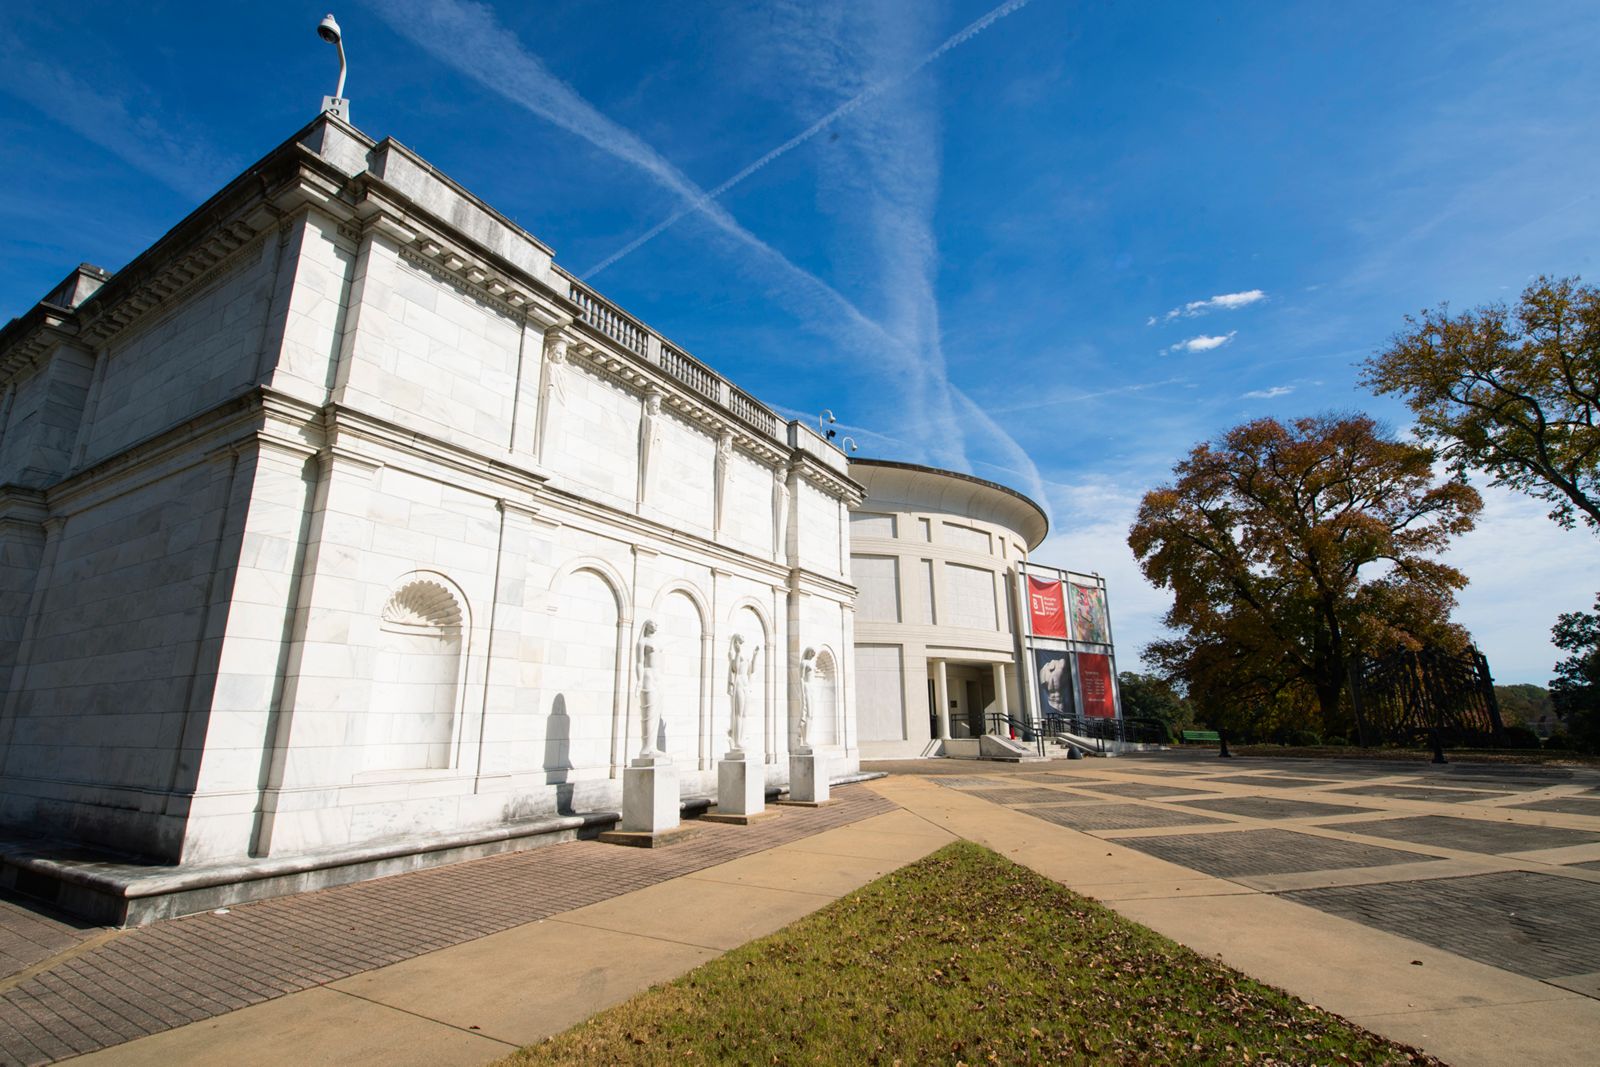 Photo of the exterior of the Memphis Brooks Museum of Art